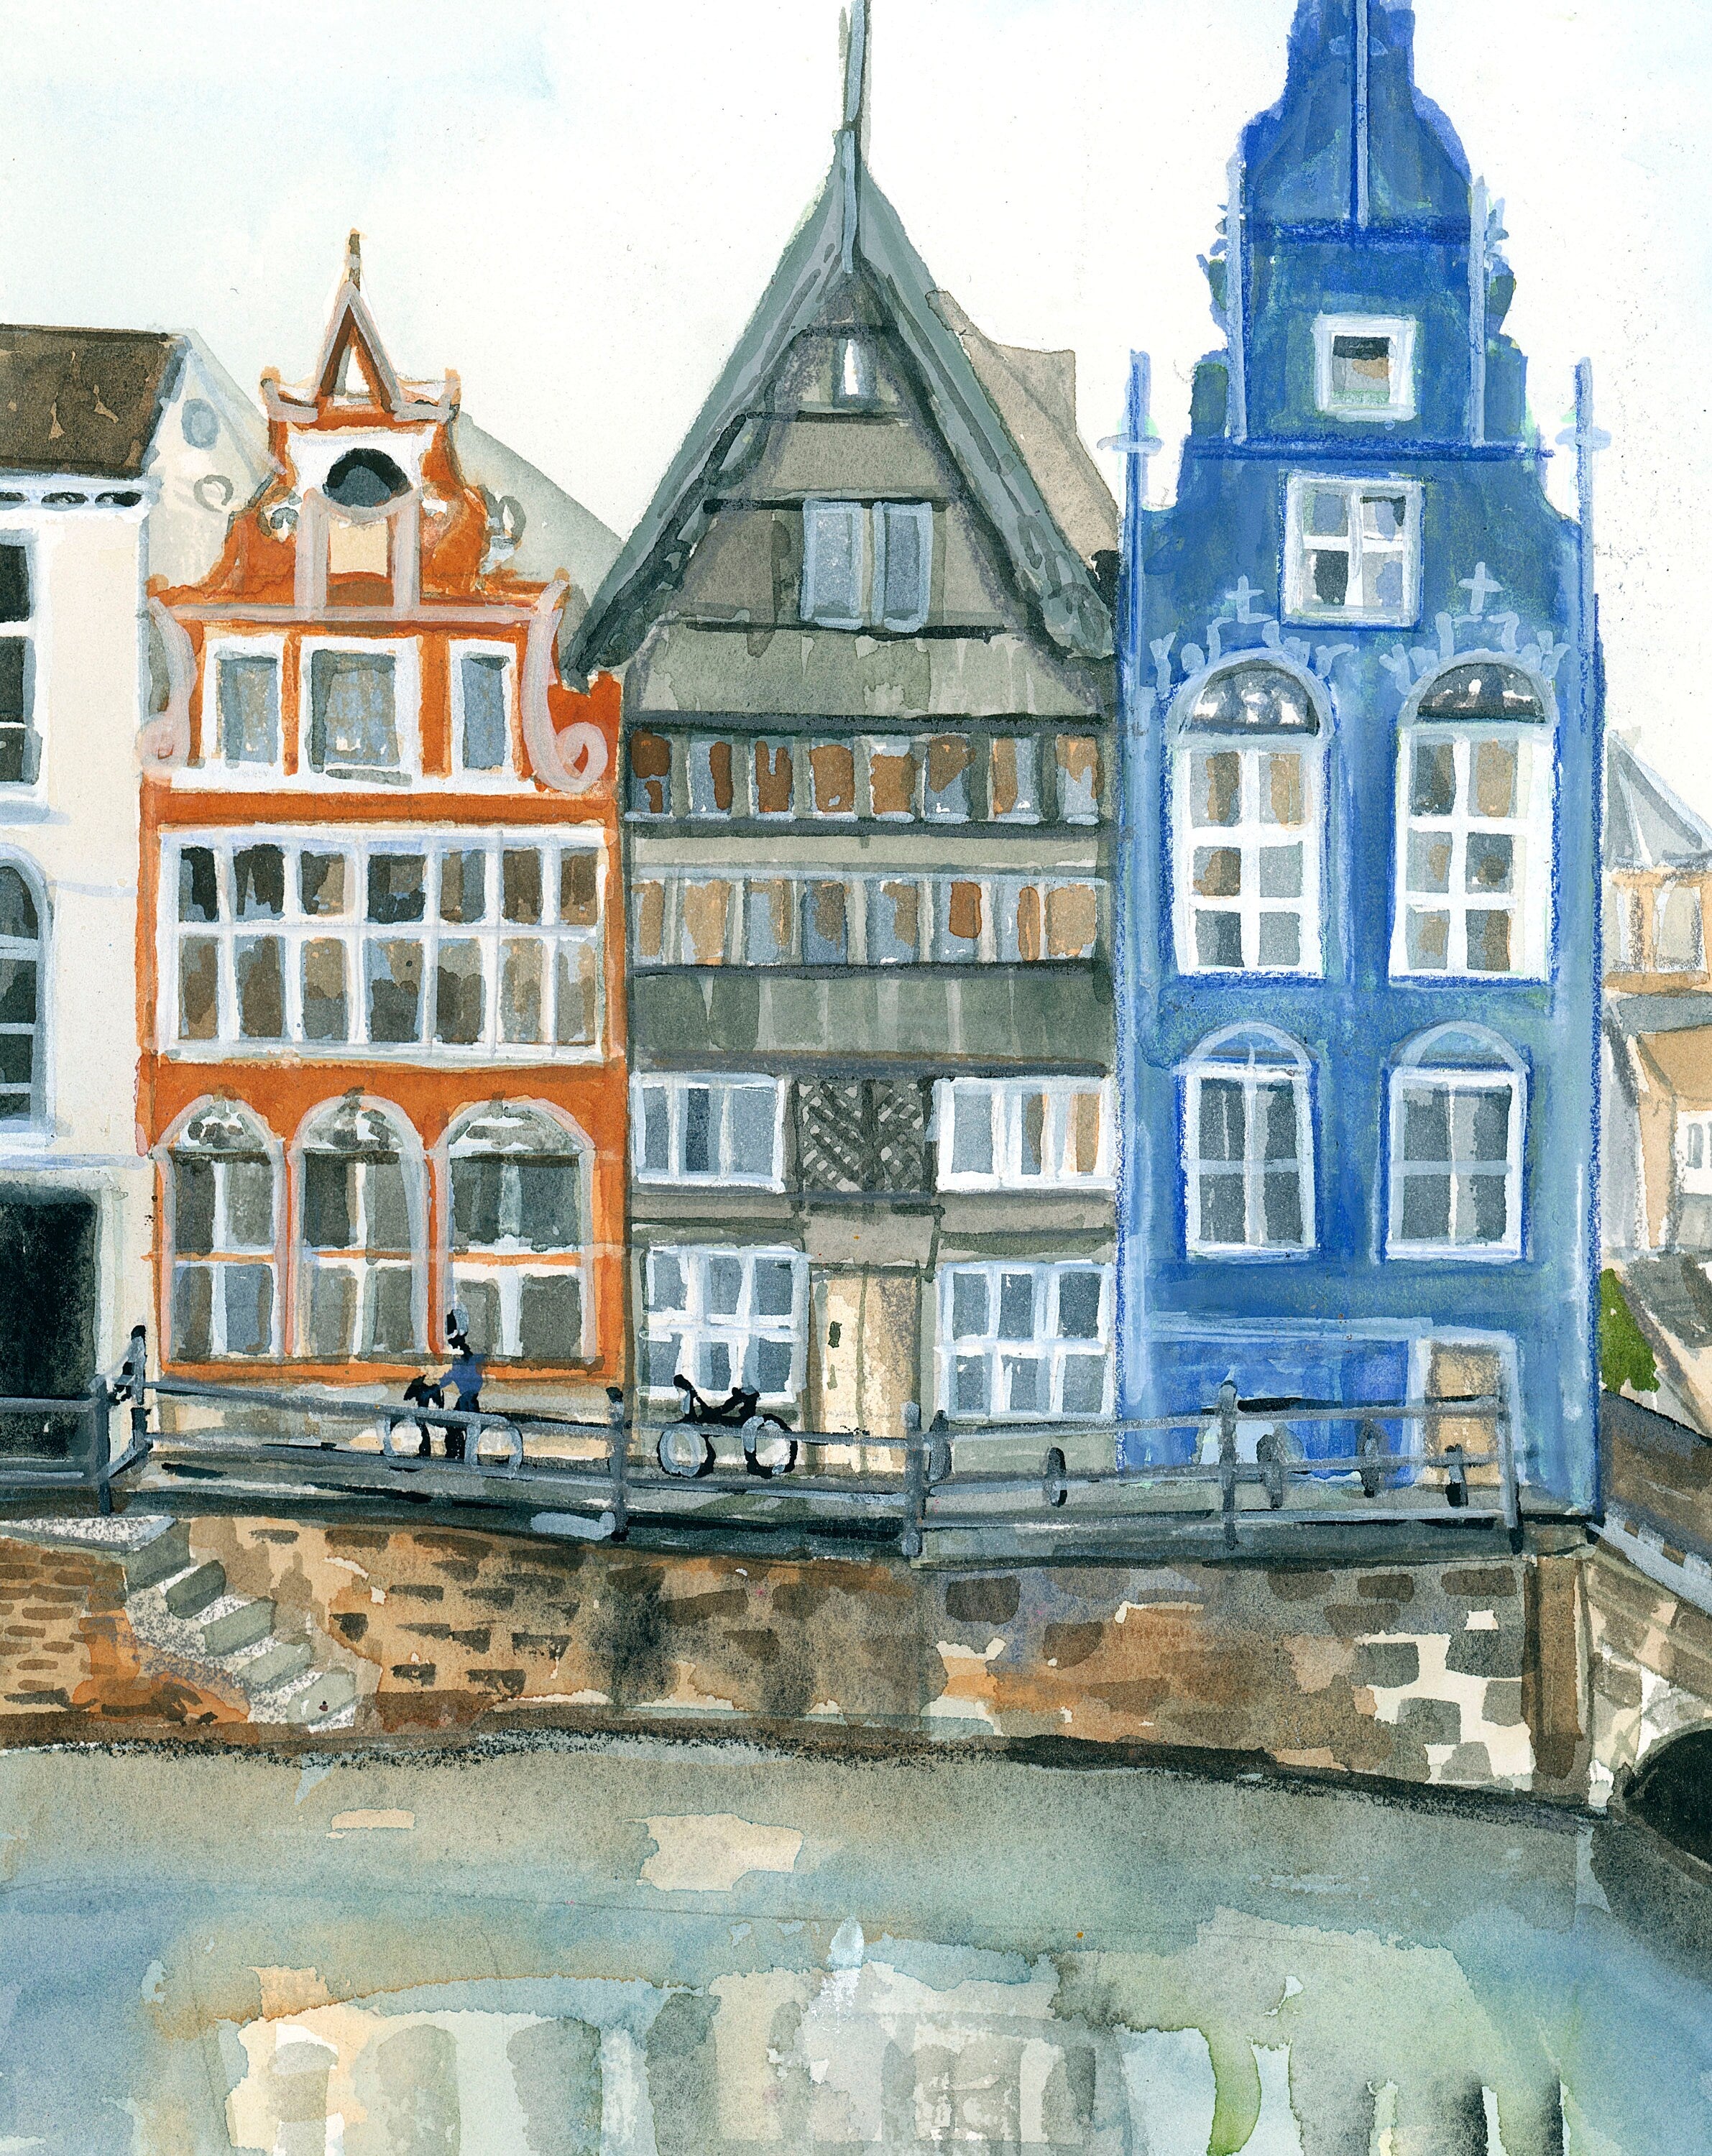 Brugge canal and buildings print of painting by Medjool Studio. Print of original gouache painting with neutral tones that captures the traditional buildings and cliffs of the Amalfi coast in Italy.